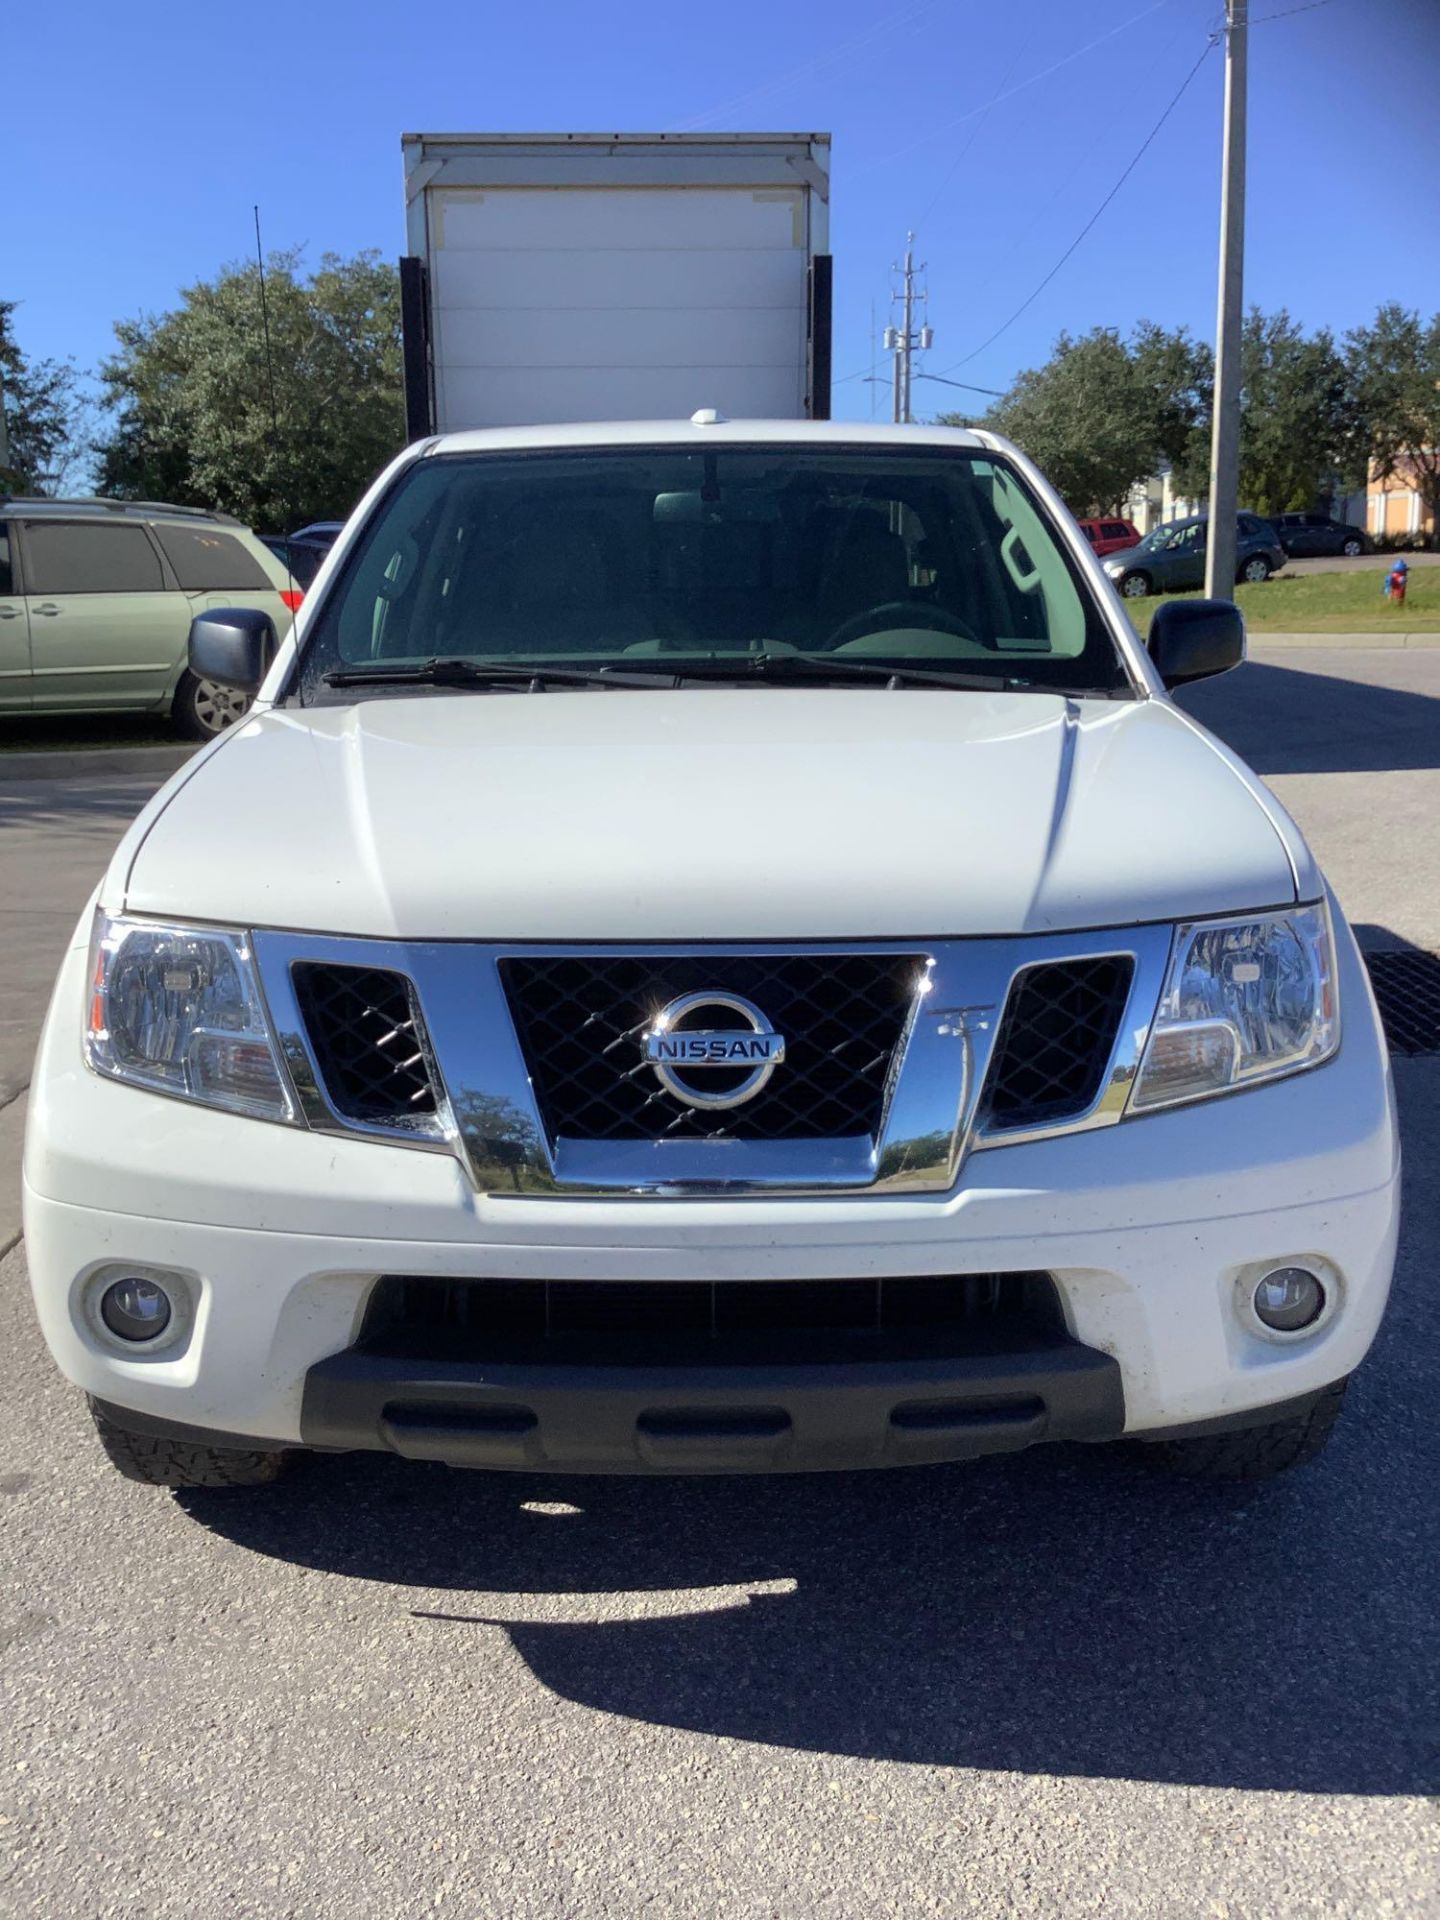 2017 NISSAN FRONTIER PICKUP TRUCK, GAS ENGINE, AUTOMATIC TRANSMISSION, CREW CAB, 4 DOOR, A/C , POWER - Image 14 of 24